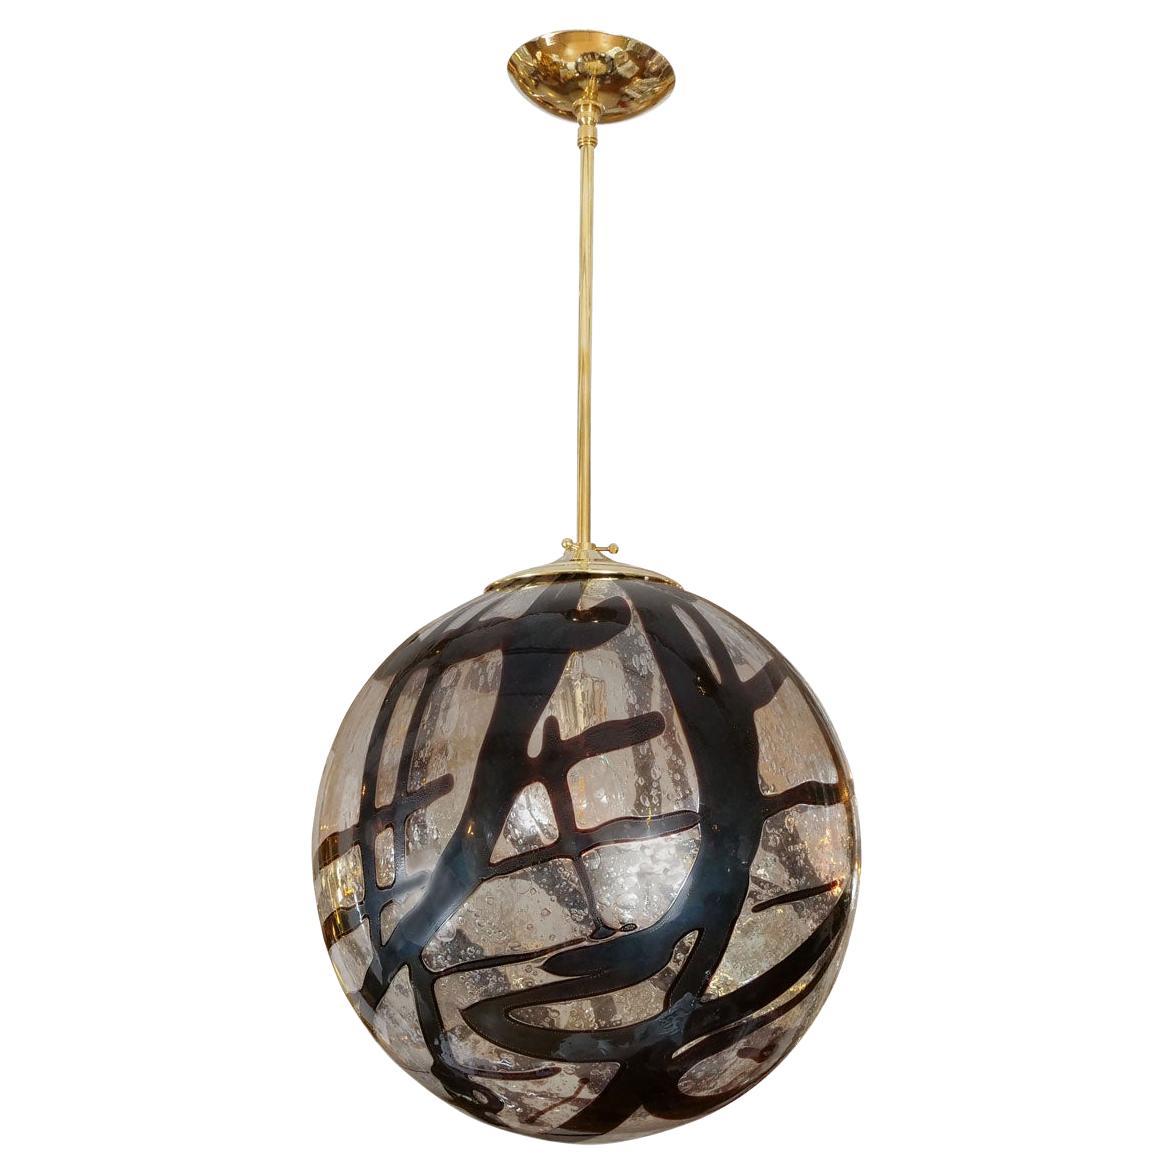 Spherical clear glass pendant with swirled amber design and brass hardware.